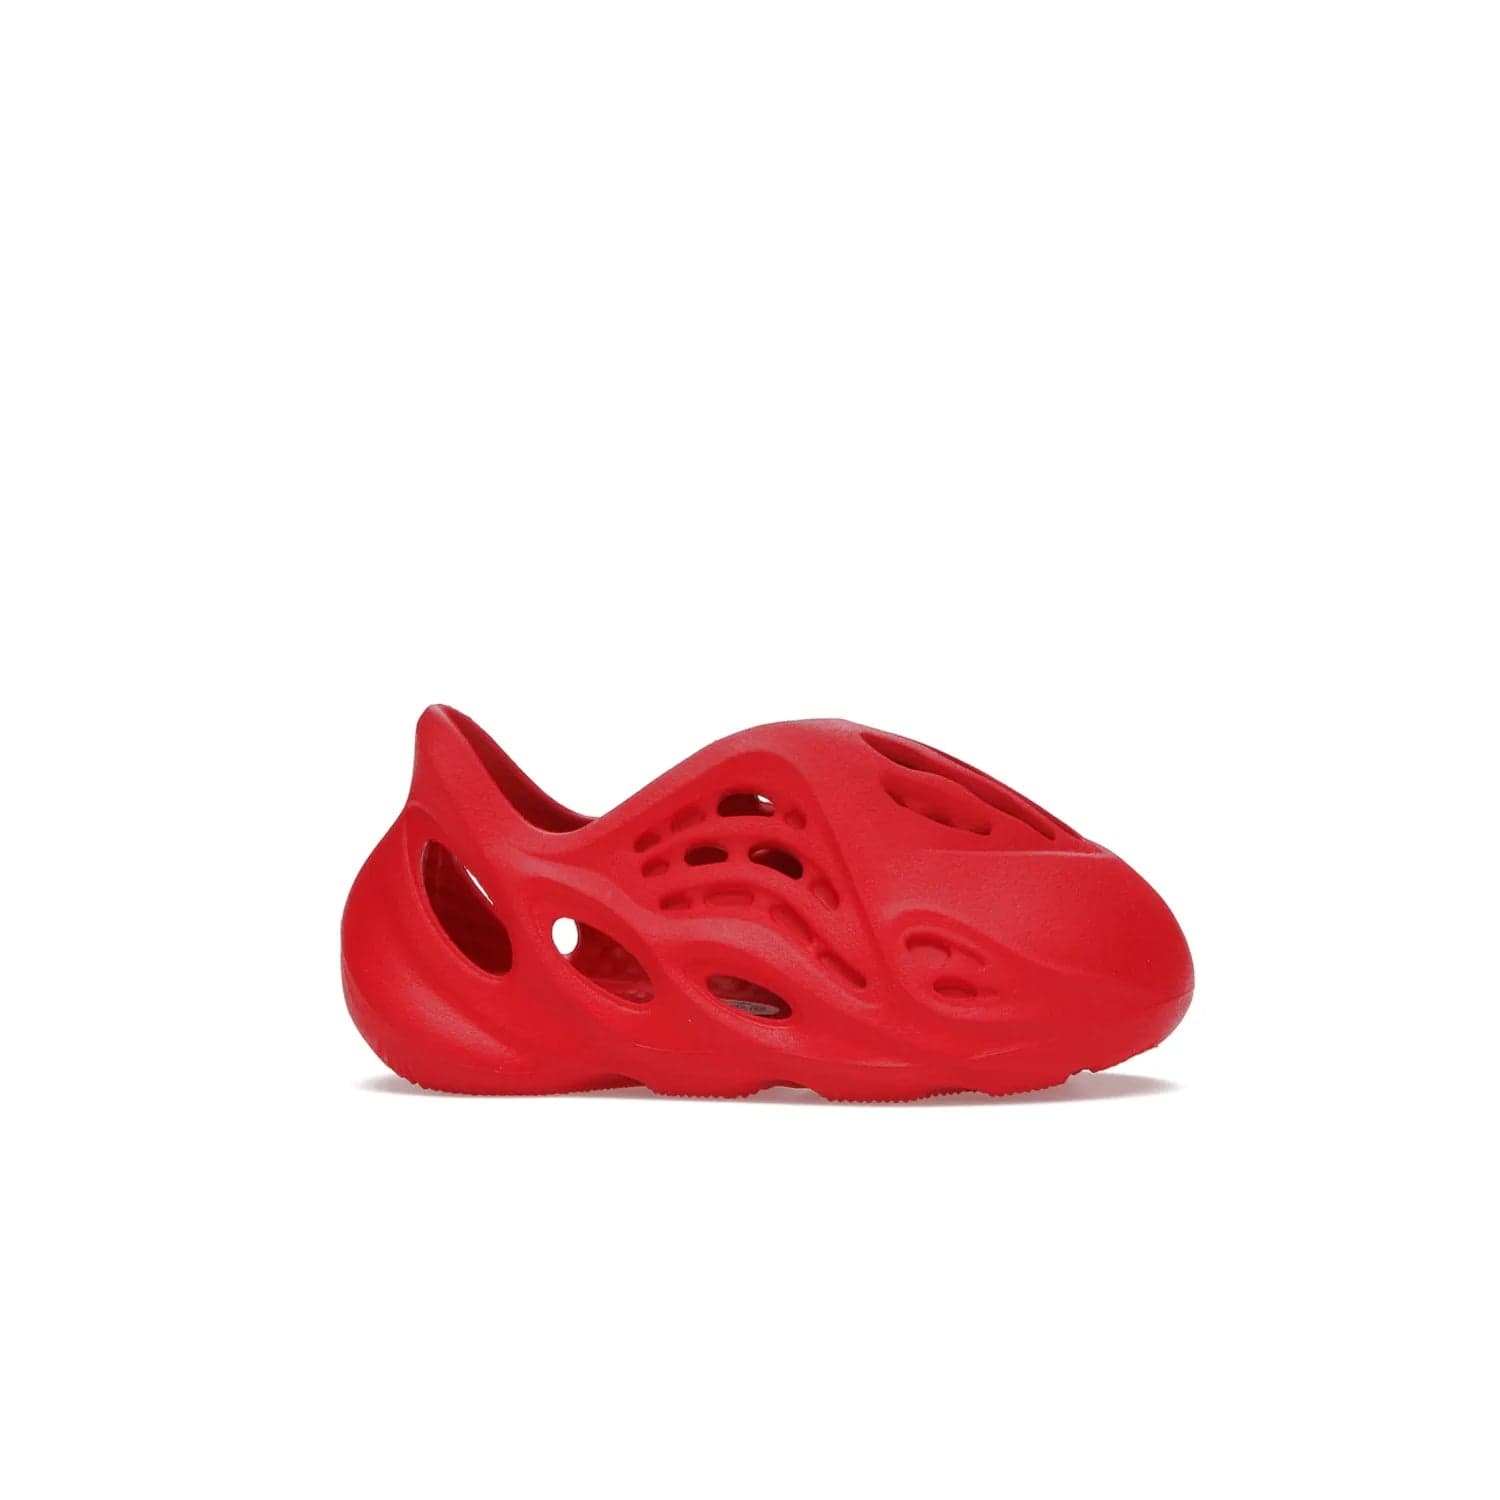 adidas Yeezy Foam RNNR Vermillion (Infants) - Image 2 - Only at www.BallersClubKickz.com - Adidas Yeezy Foam RNNR Vermillion (Infants) brings a vibrant monochromatic design and lightweight foam material to keep feet in optimal comfort. Signature details provide a finishing touch of flair.